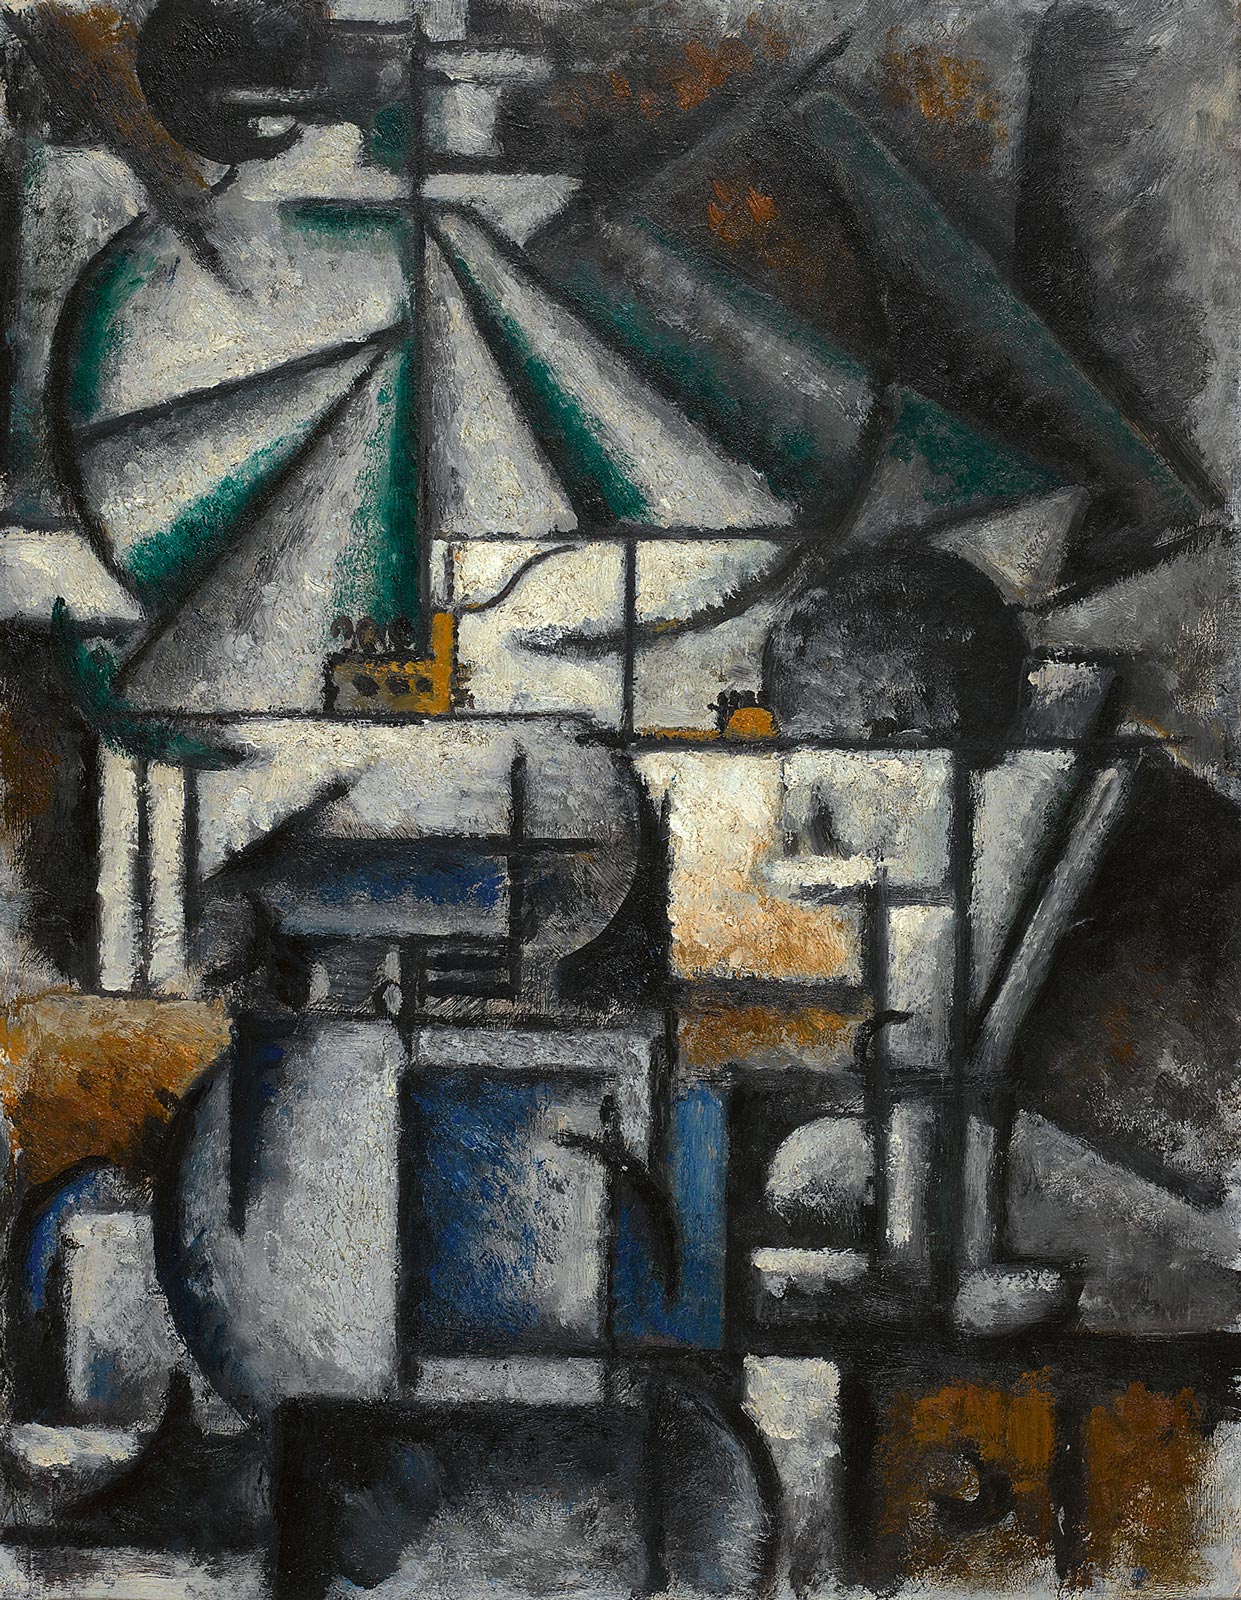 Ardengo Soffici, Deconstruction of the Planes of a Lamp, 1912-13; Two Bathers, c.1911